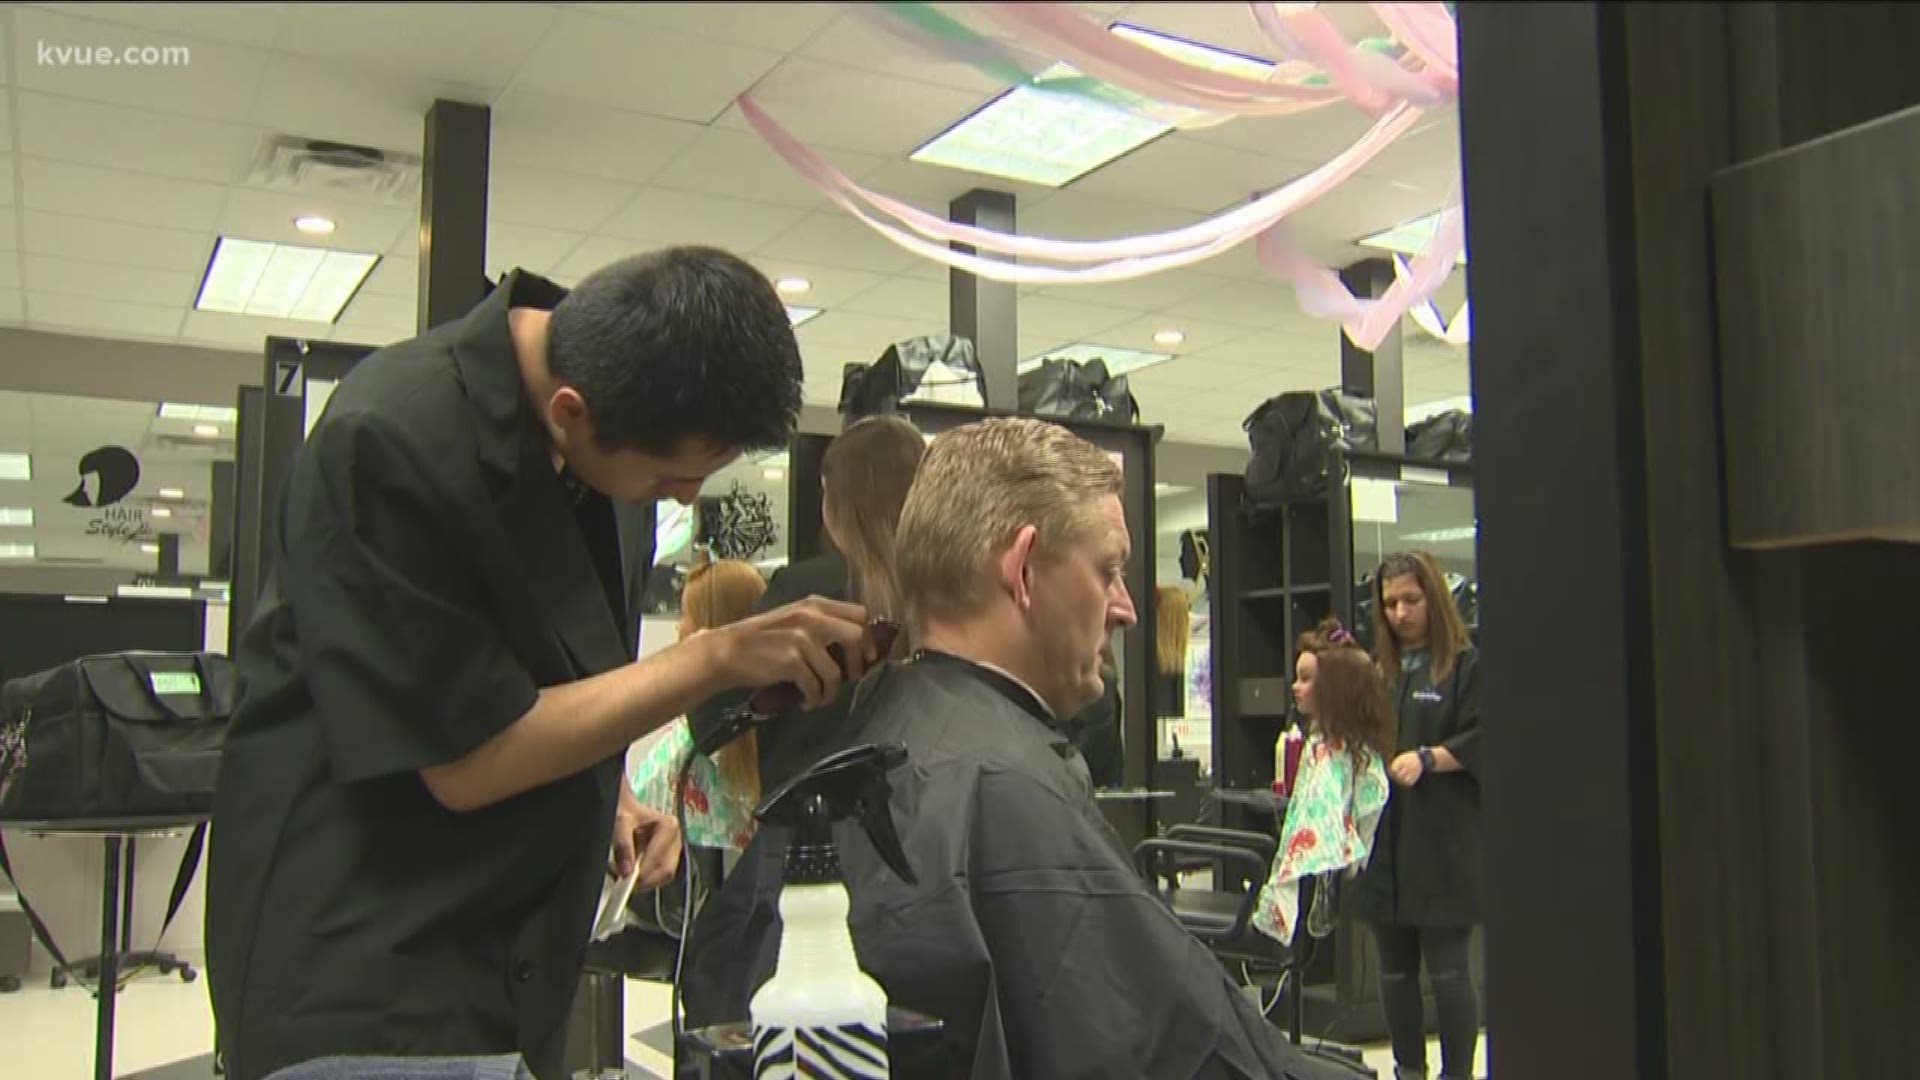 At Hays High School in Buda, students are getting a jump start on their future through their cosmetology program.